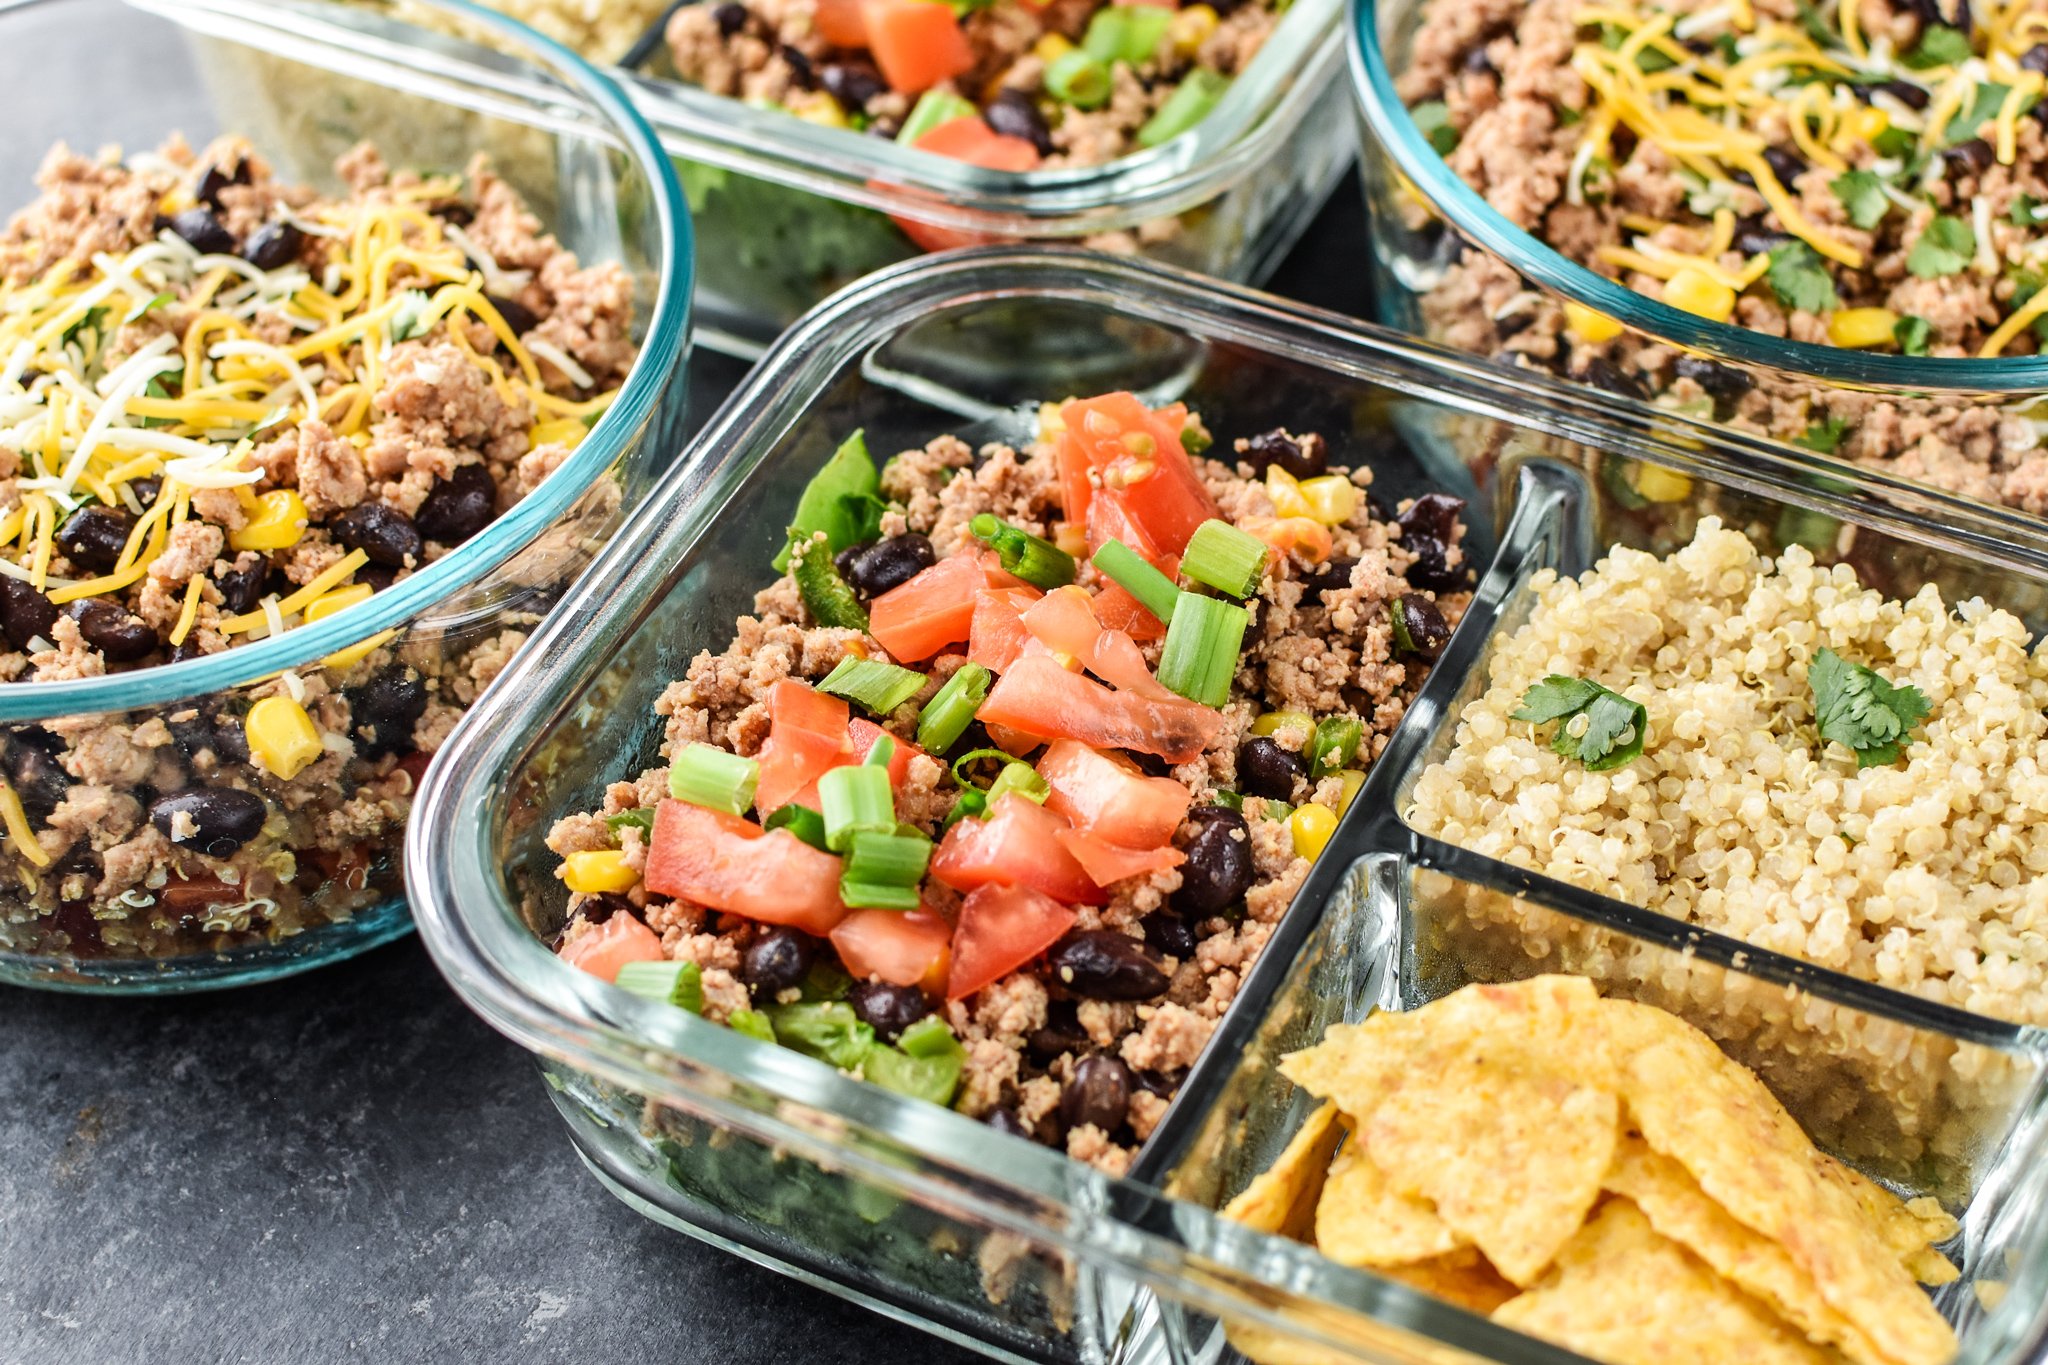 Four meal prepped lunches viewed from above for Hot & Cold Turkey Taco Meal Prep; two taco salads with quinoa and chips on the side and two taco bowls with tomato and green chili quinoa.